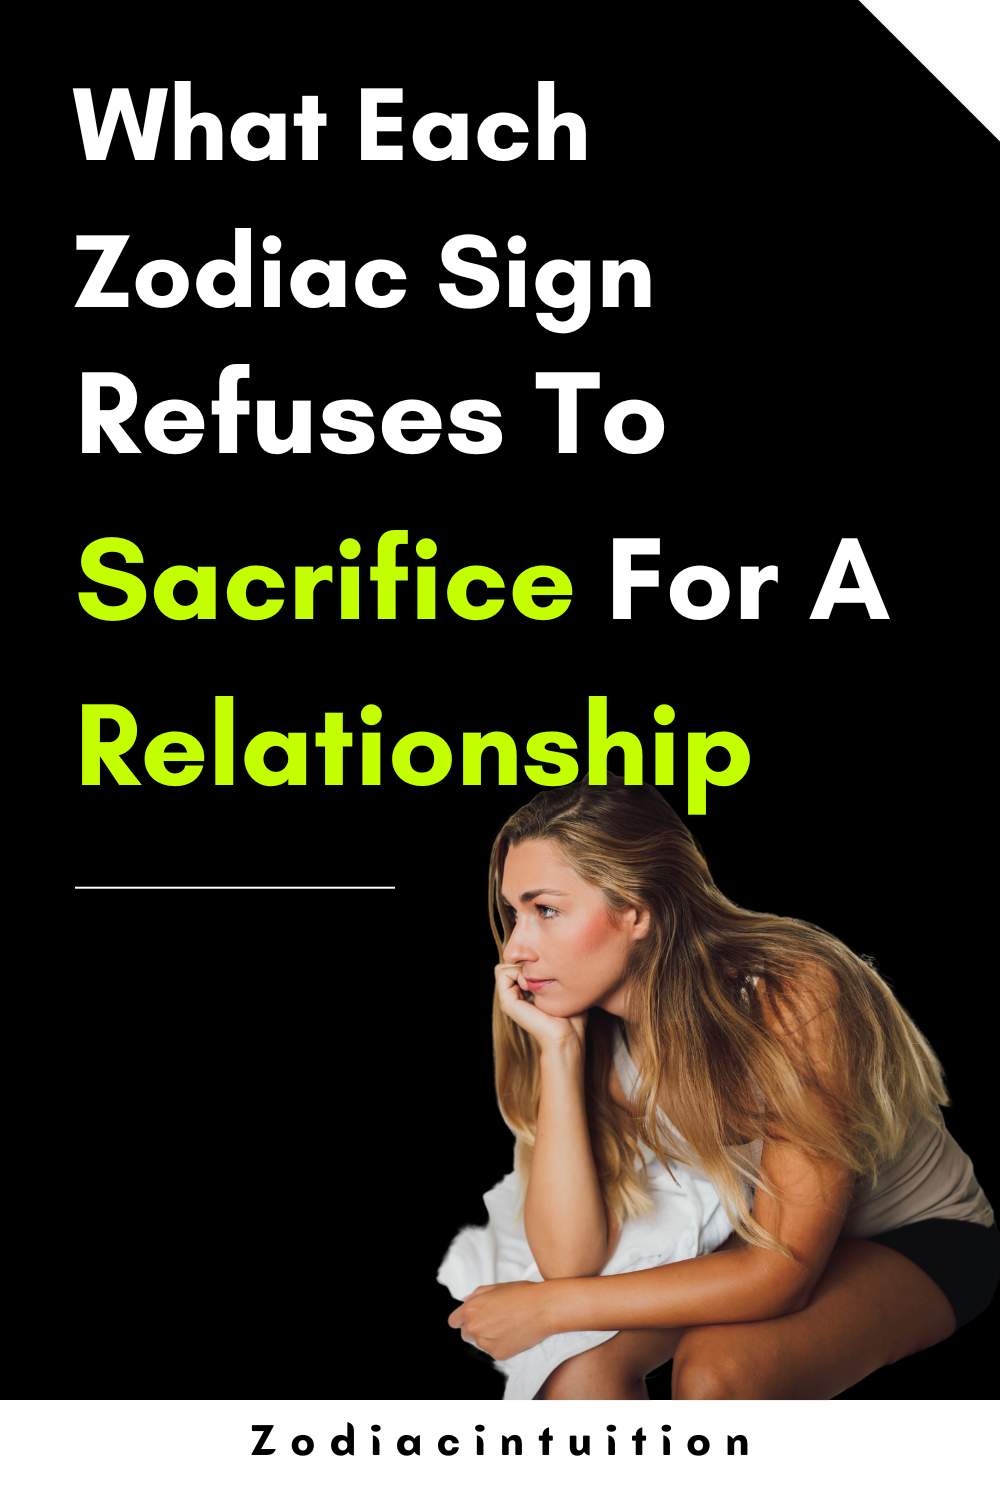 What Each Zodiac Sign Refuses To Sacrifice For A Relationship